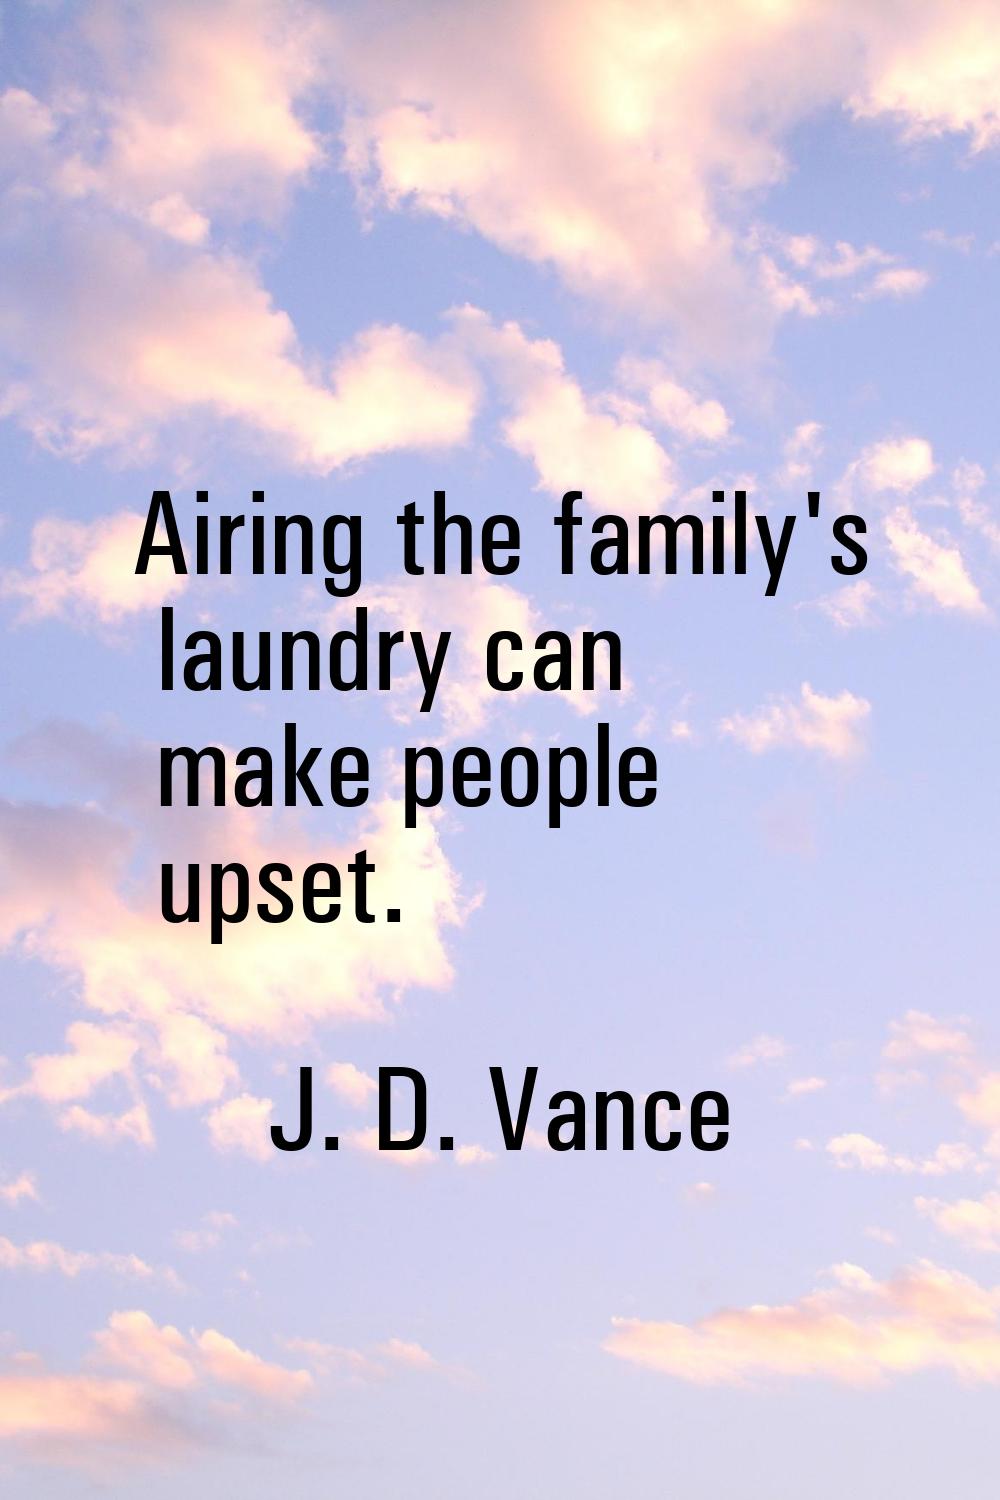 Airing the family's laundry can make people upset.